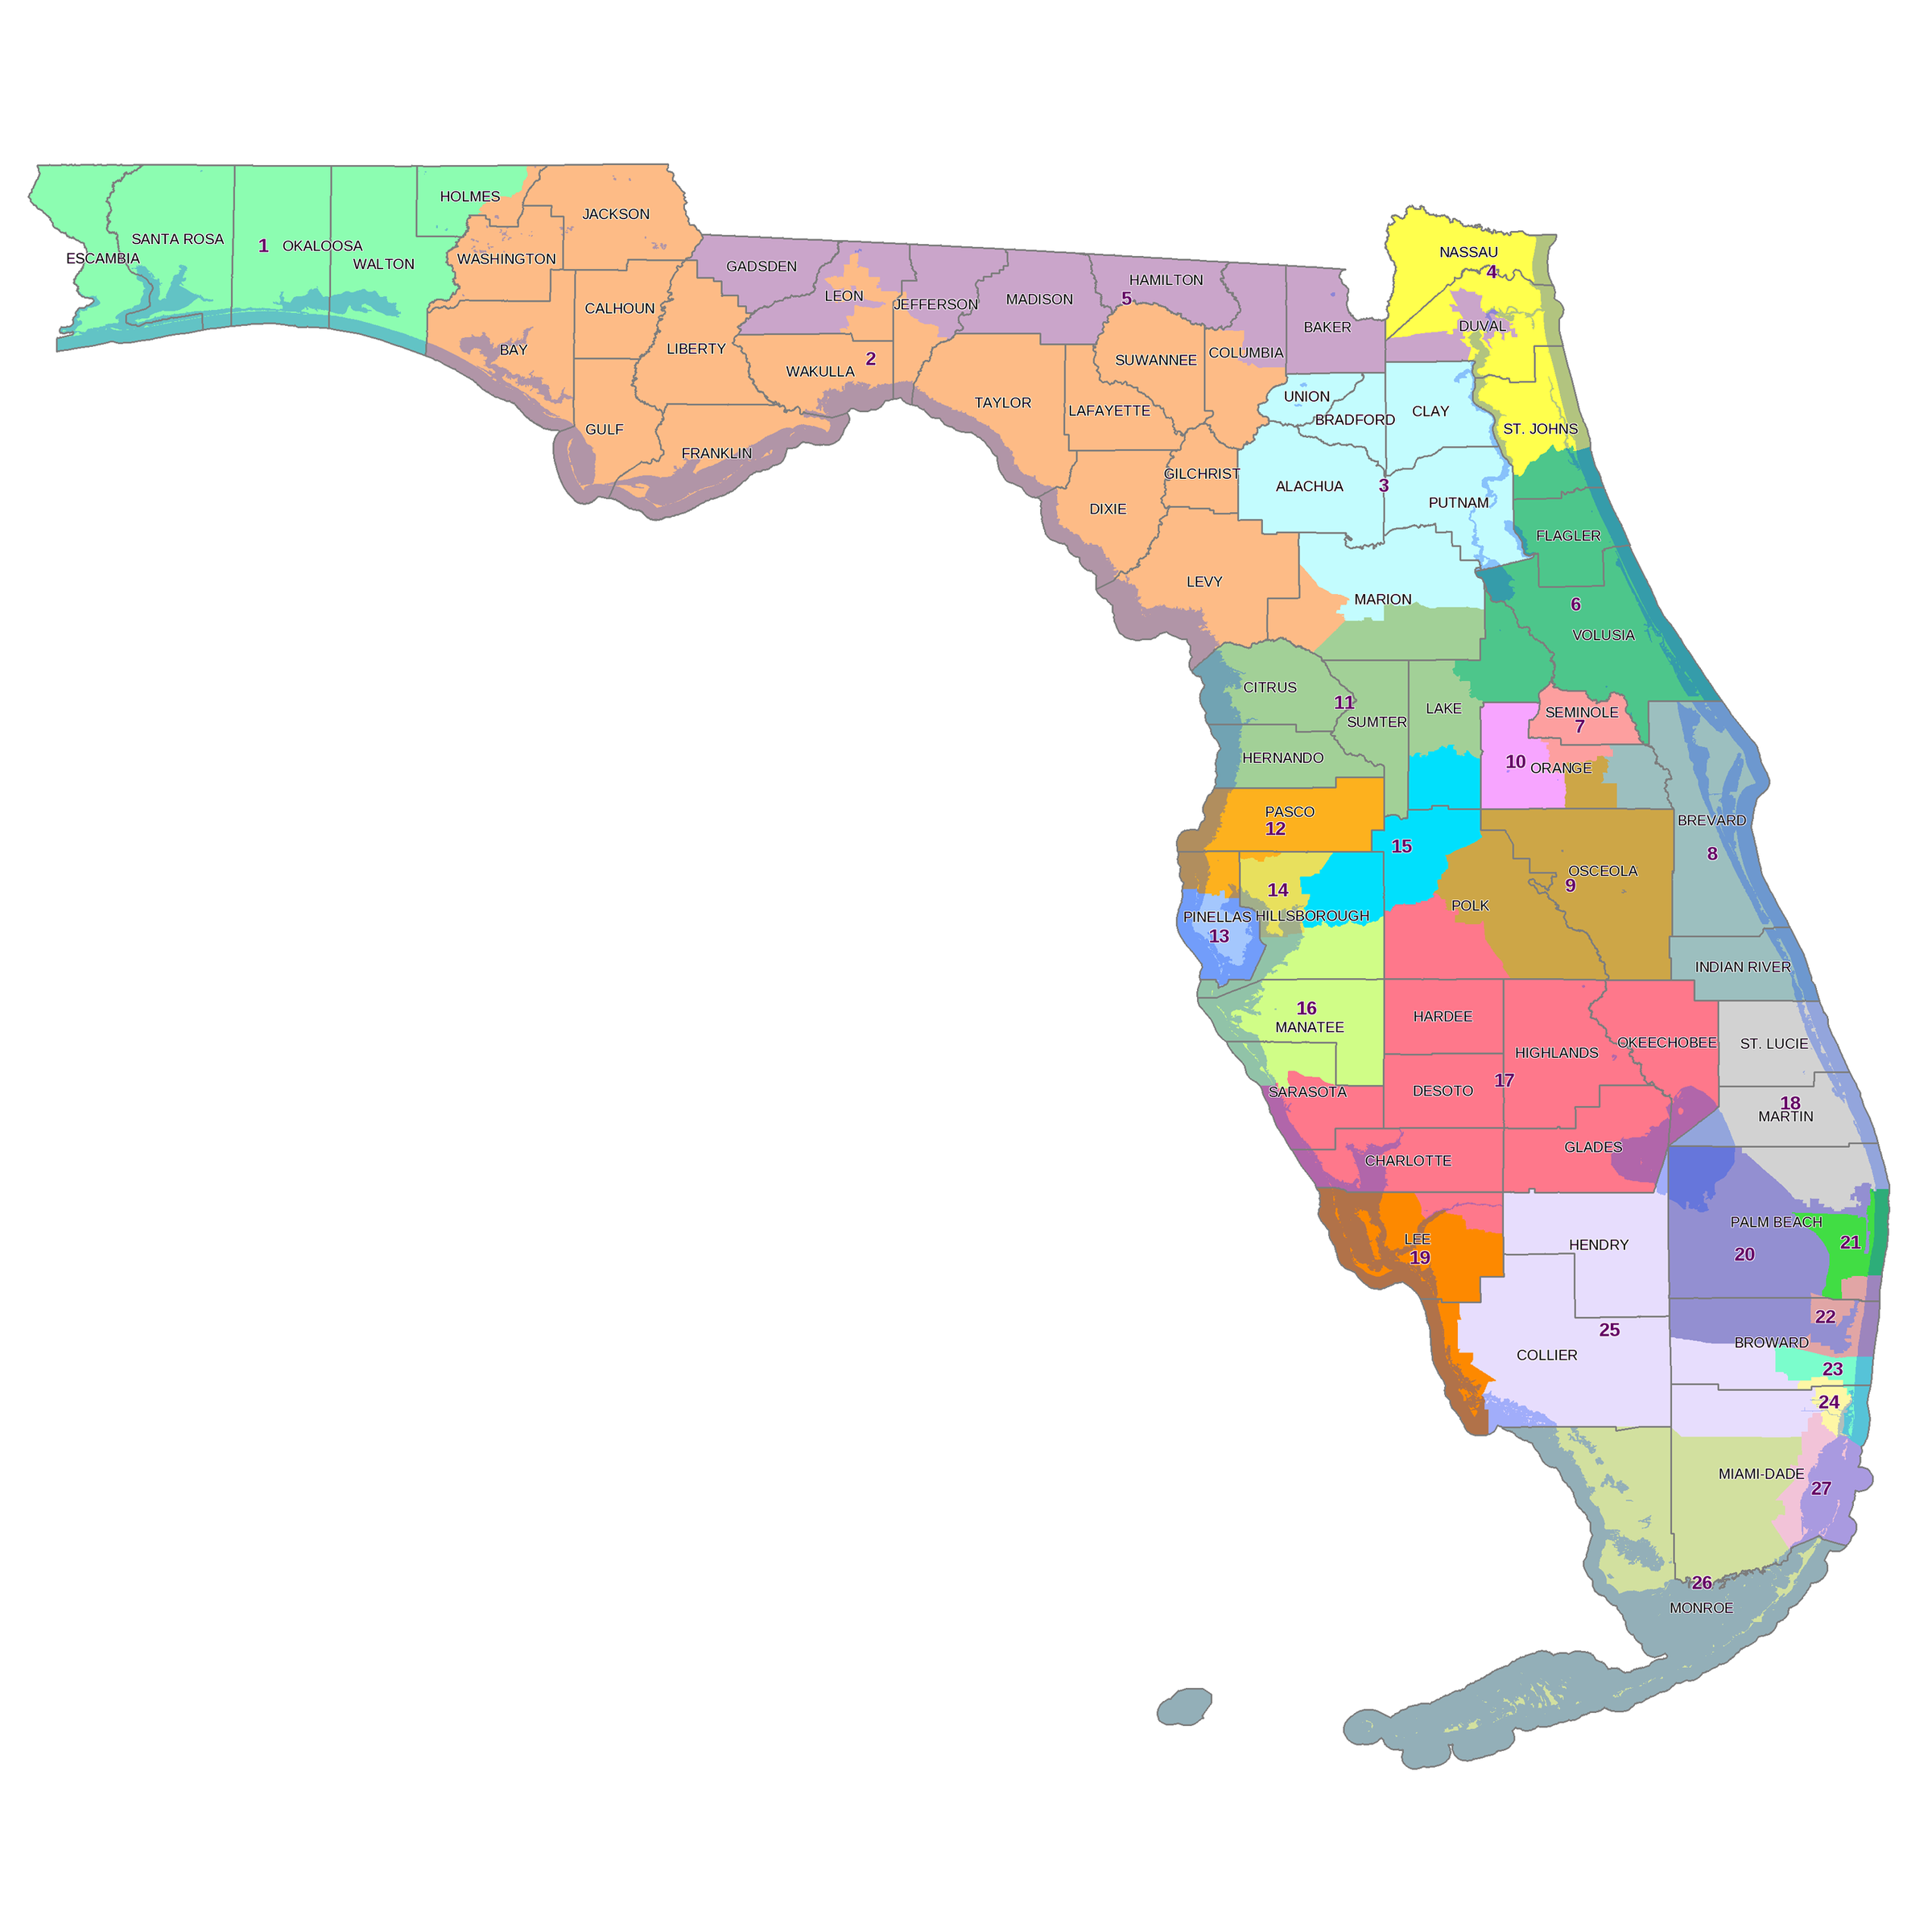 New Florida Congressional Map Sets Stage For Special Session